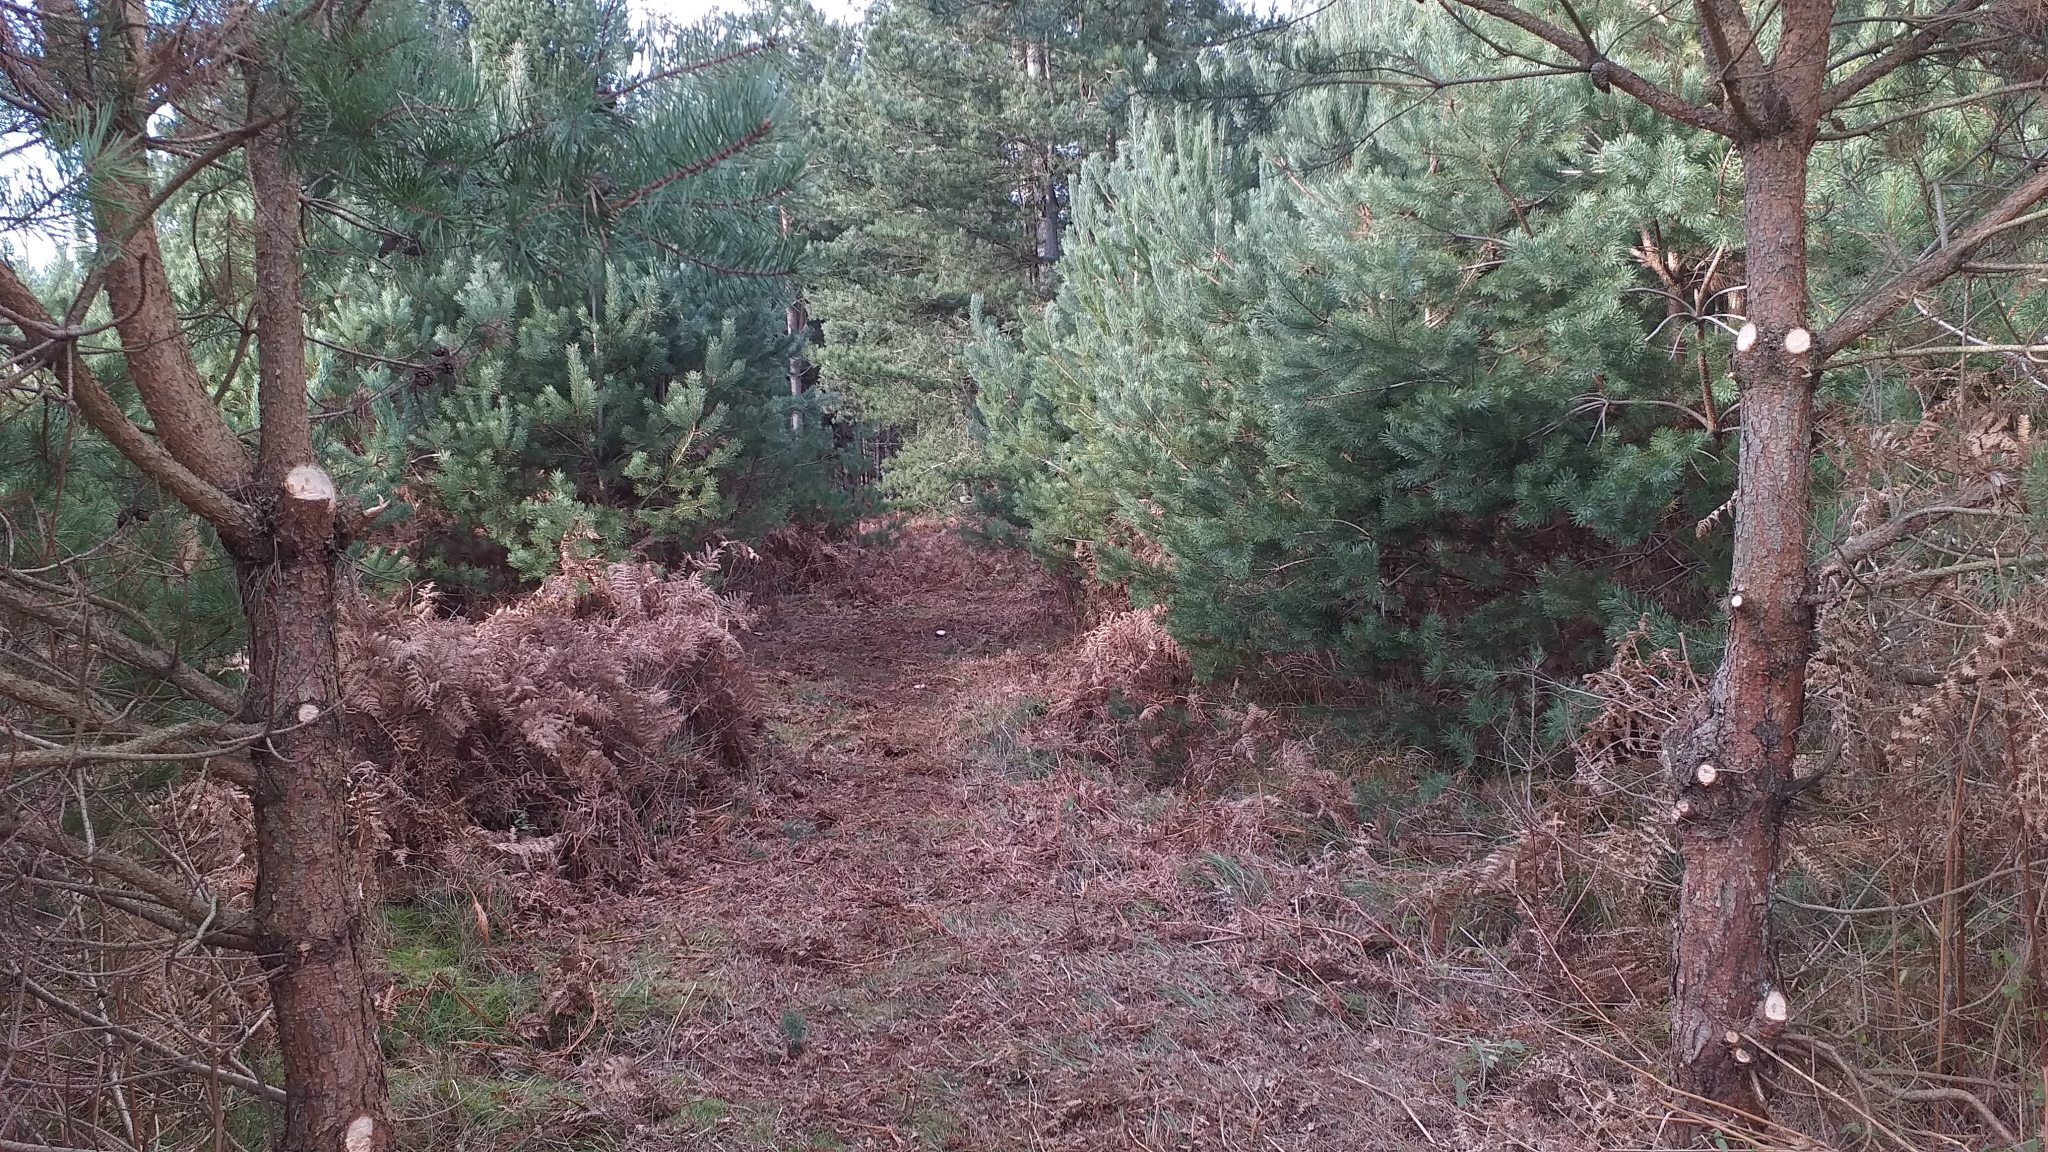 A photo from the FoTF Conservation Event - December 2019 - Self Seeded Pine Tree Removal on the Goshawk Trail : A photo showing the work undertaken by the volunteers